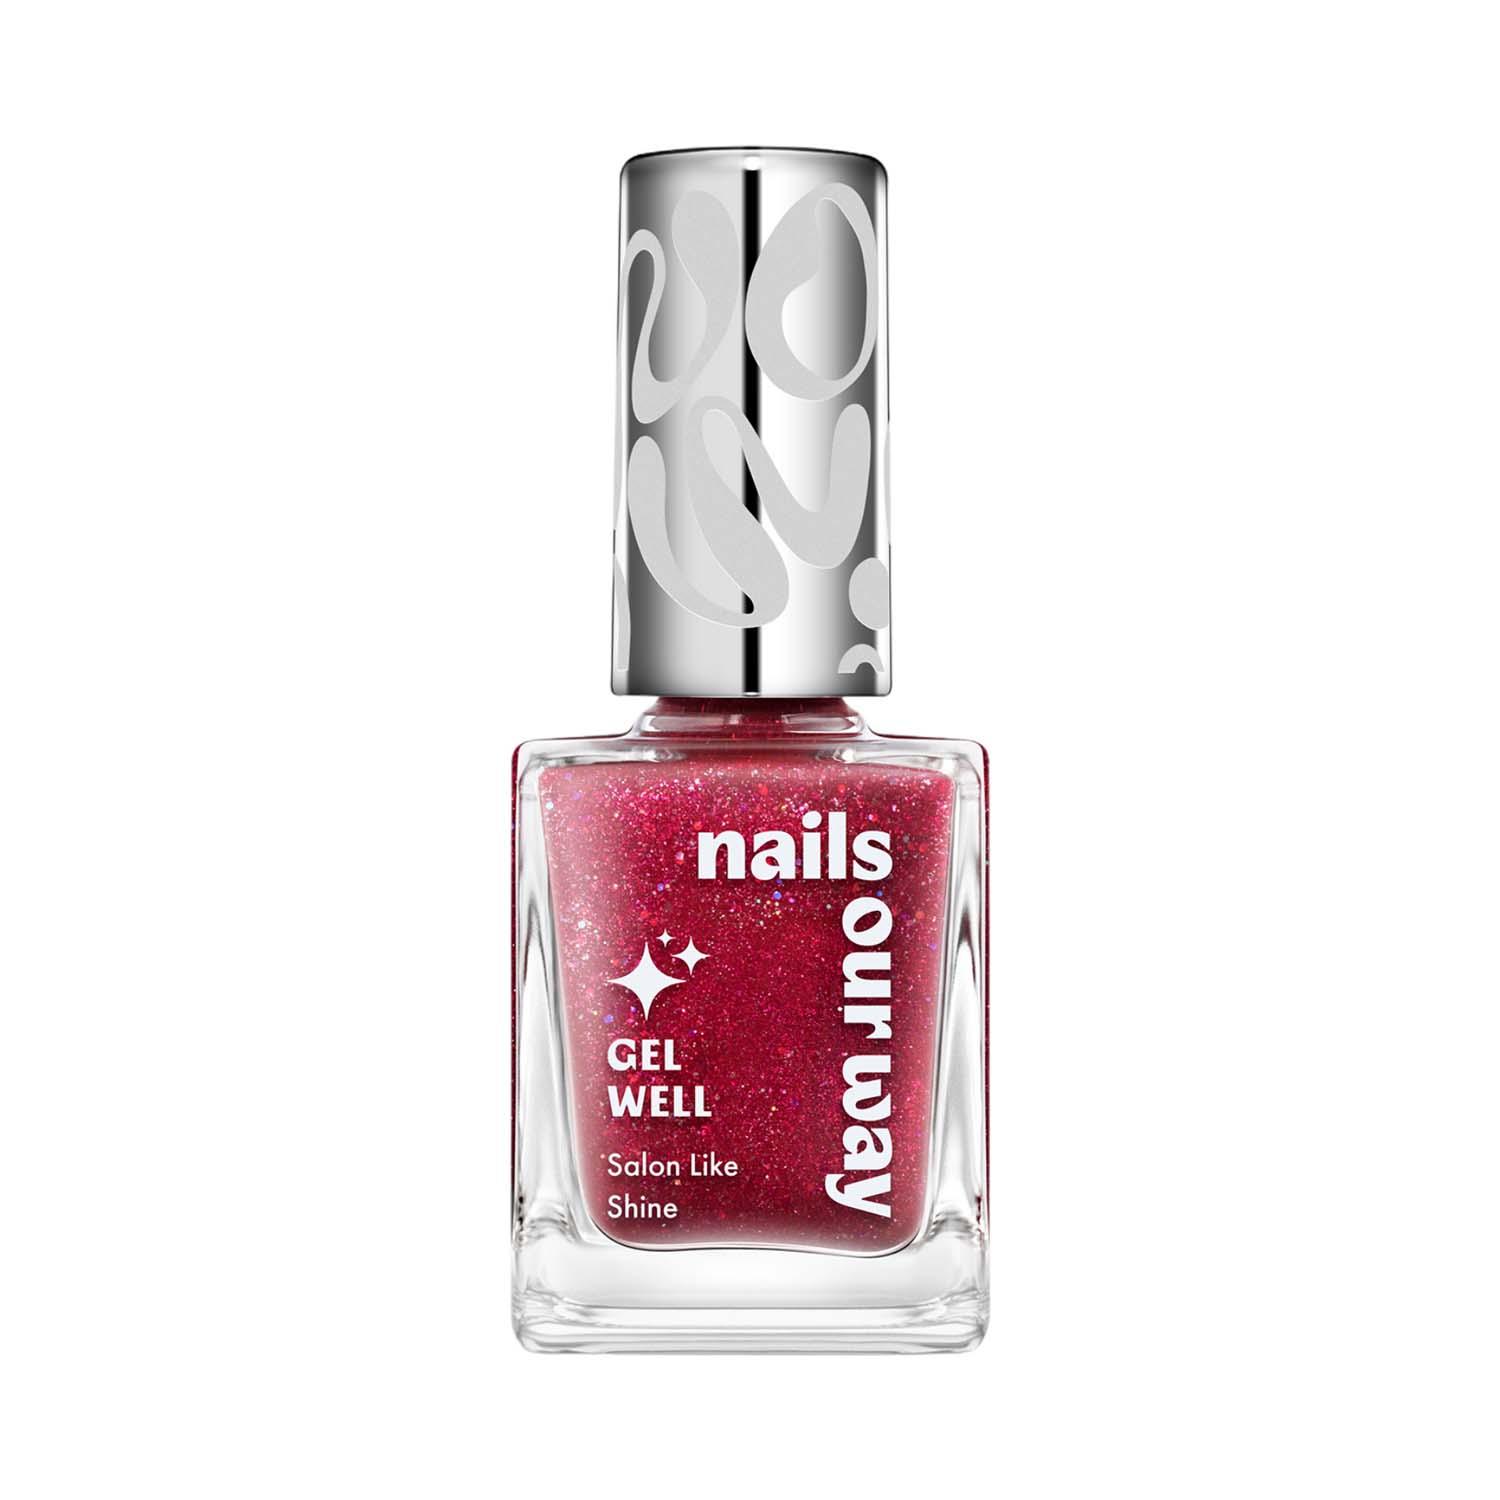 Nails Our Way | Nails Our Way Gel Well Nail Enamel - 108 Loyal (10 ml)